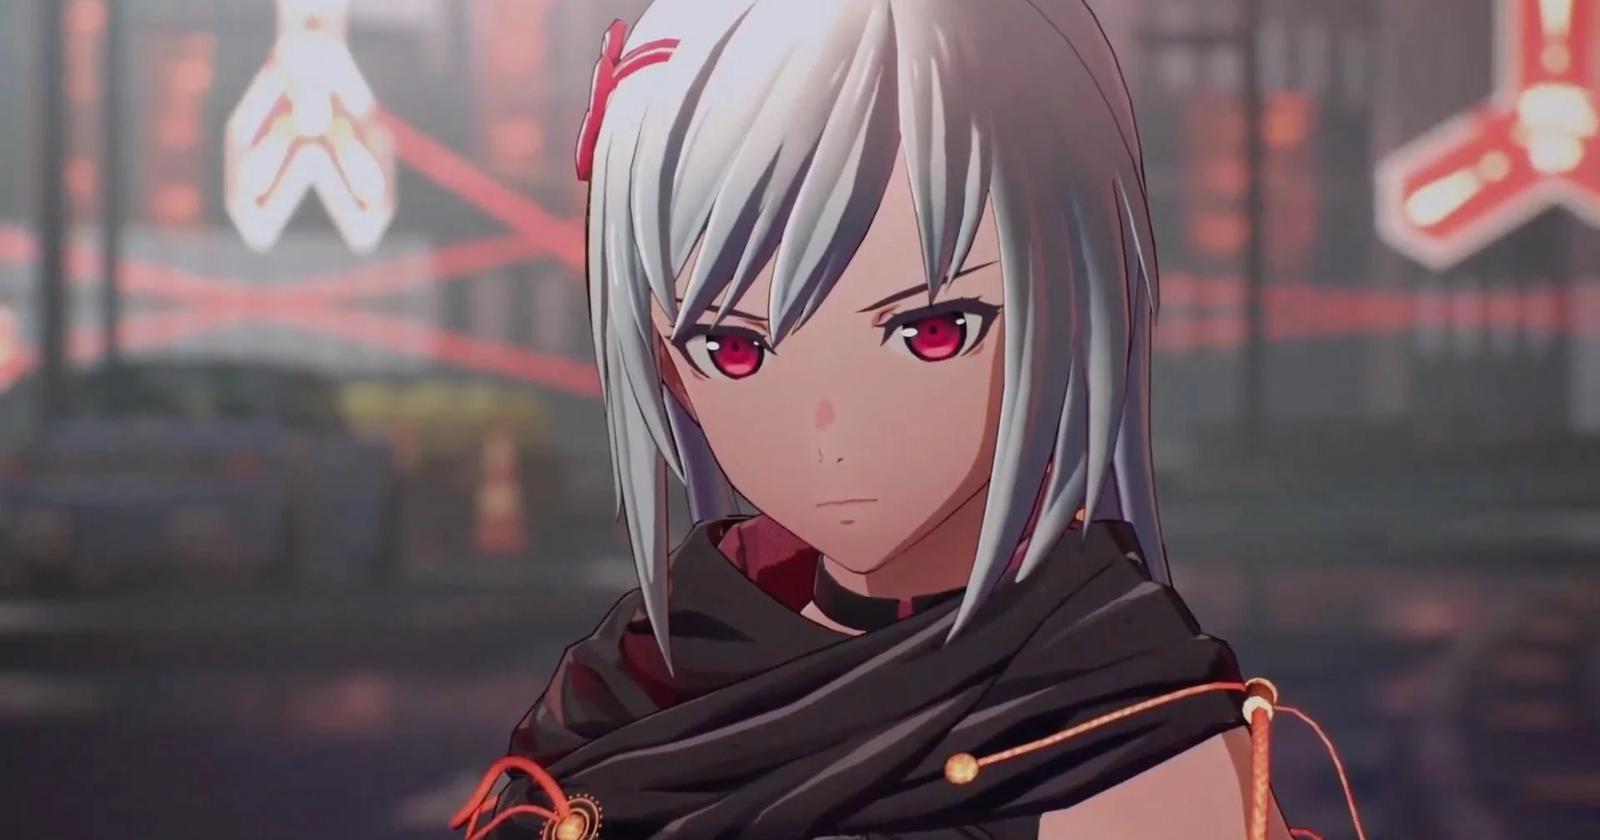 Have a look at the opening animation for Scarlet Nexus